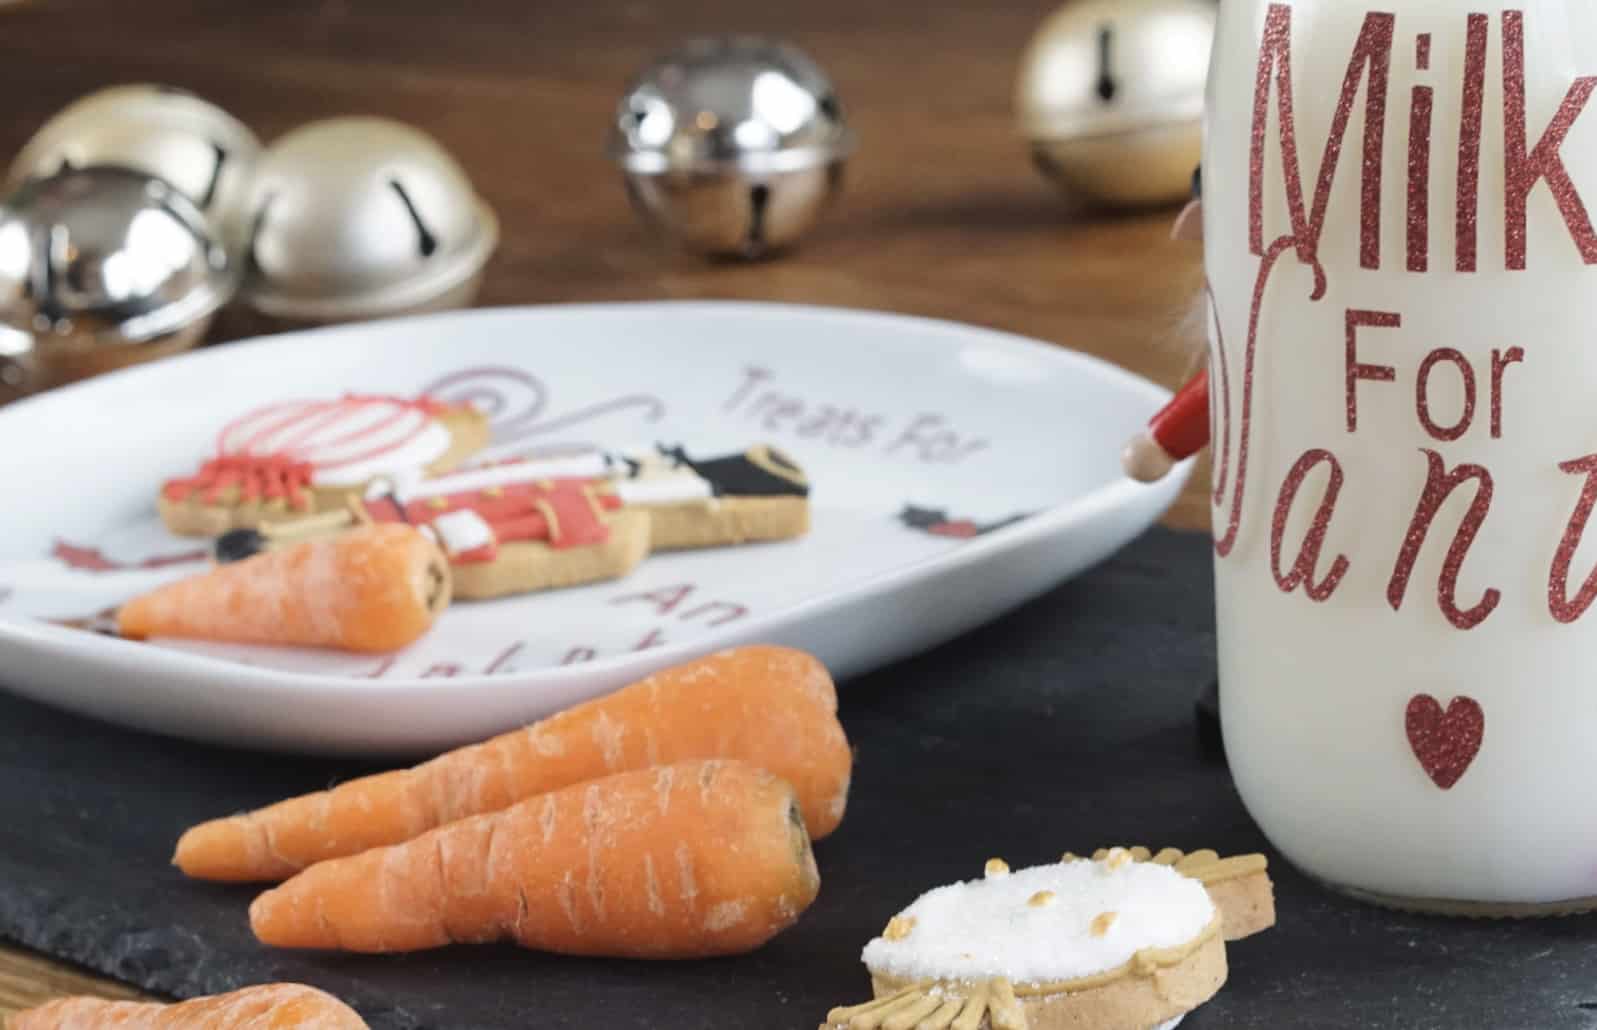 How To Make A Treats For Santa Plate And Bottle